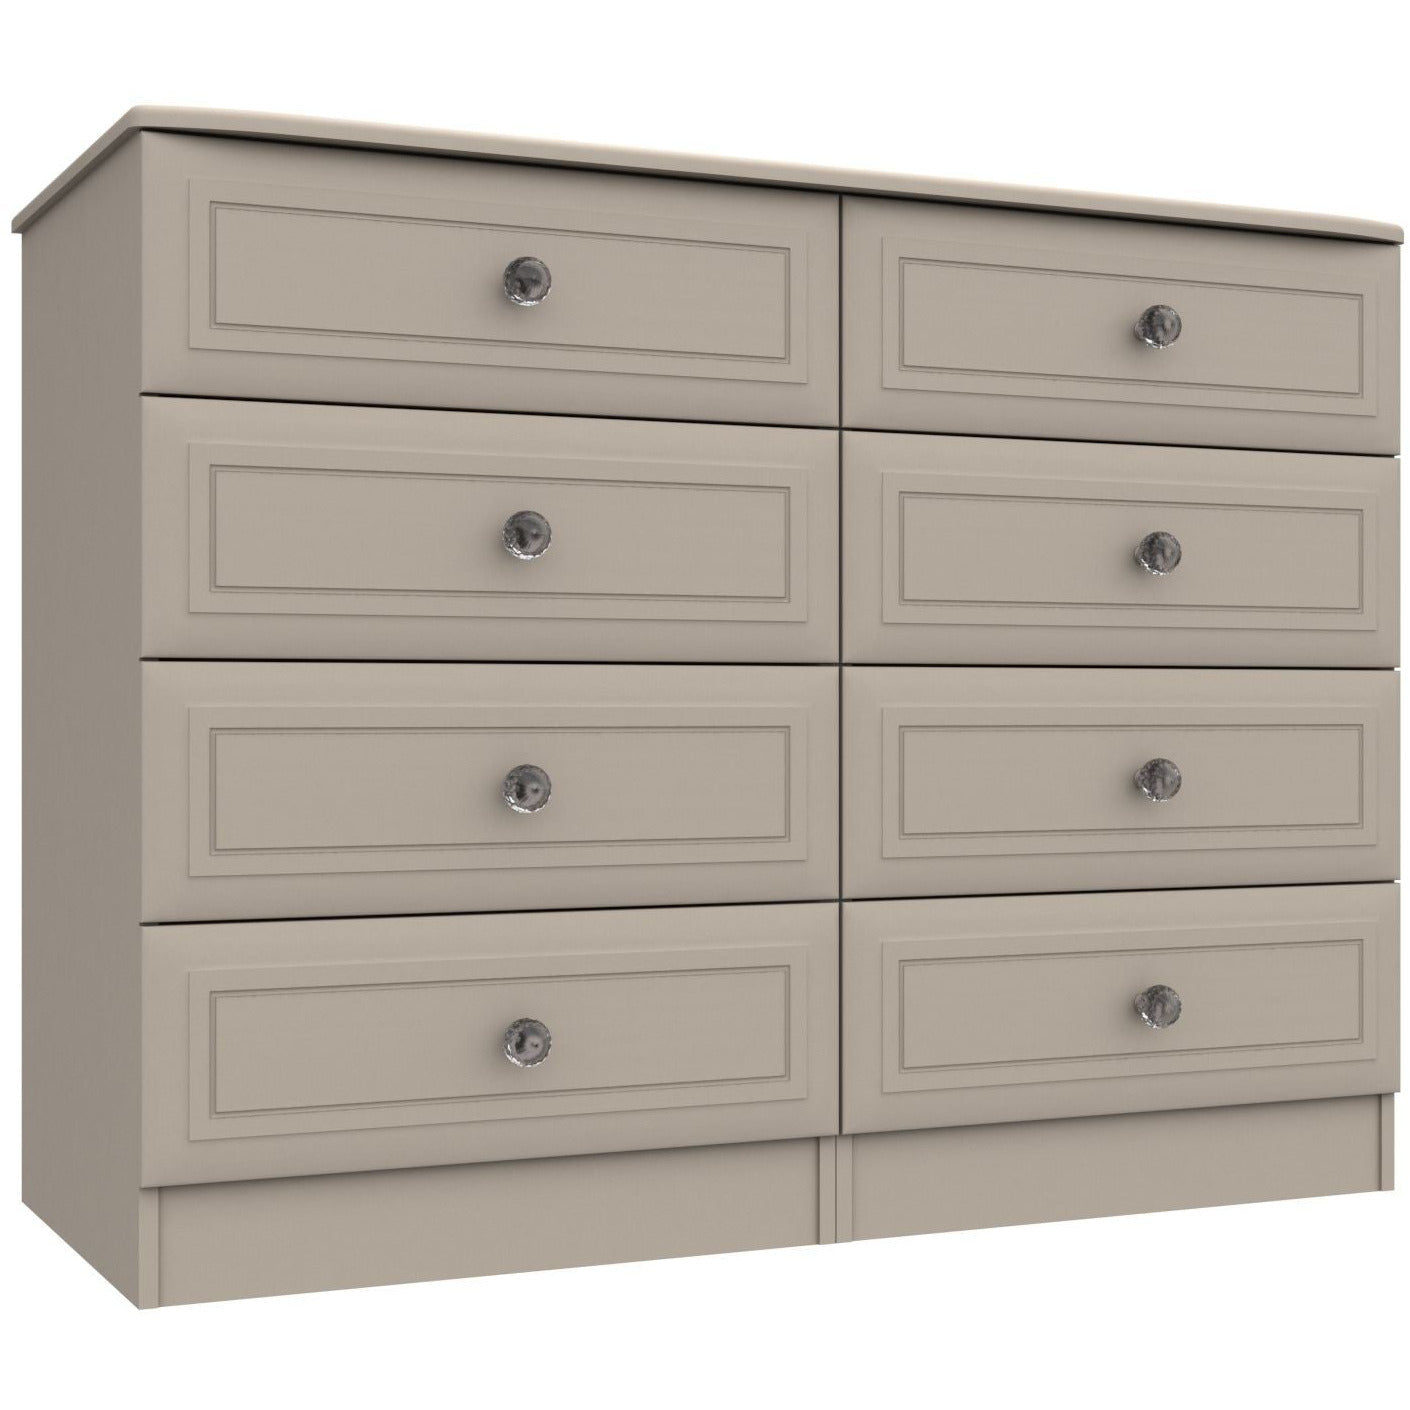 Hadleigh 4 Drawer Double Chest